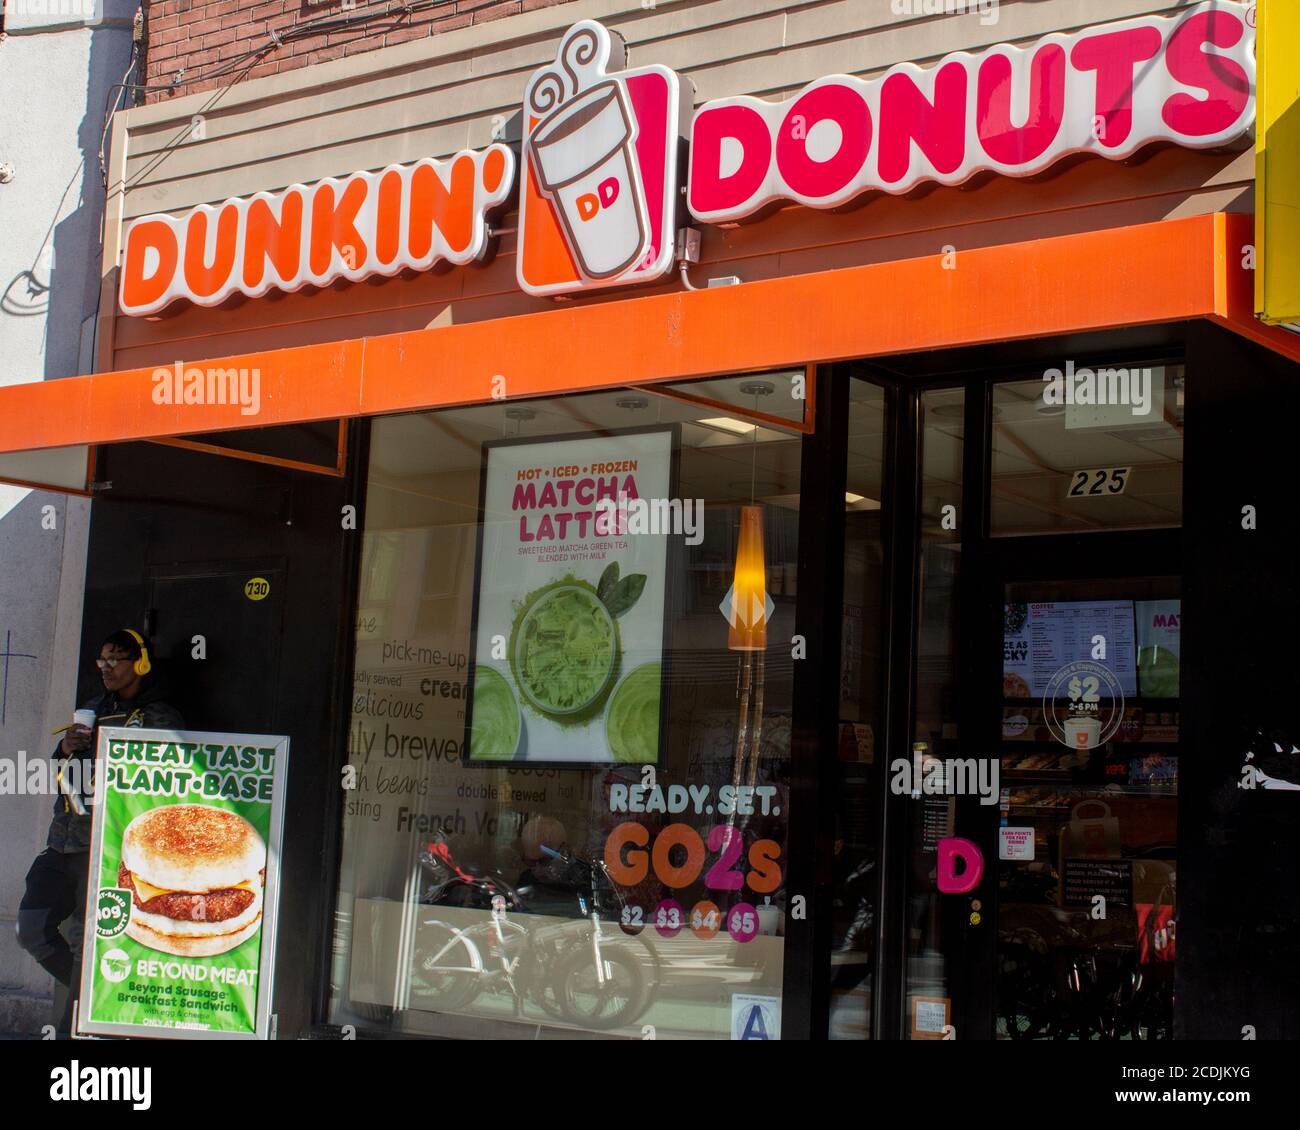 exterior of a Dunkin Donuts store in Chelsea, Manhattan with signs advertising their plant based, meatless burgers and matcha lattes Stock Photo